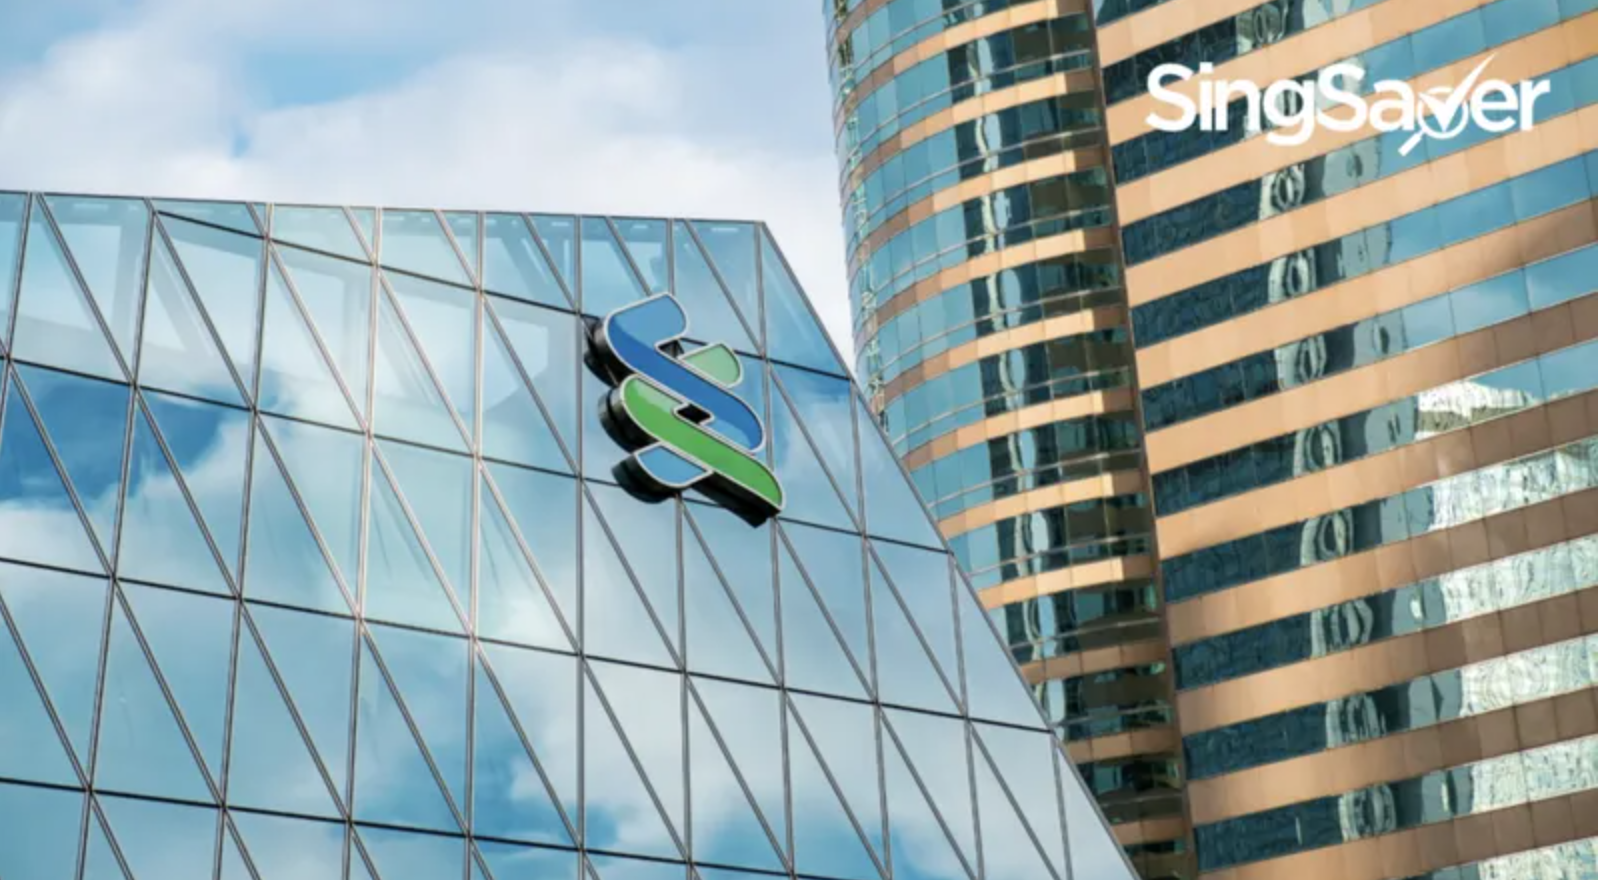 Standard Chartered Smart Credit Card (Review): Attractive Perks, but Only for Certain Types of Customers